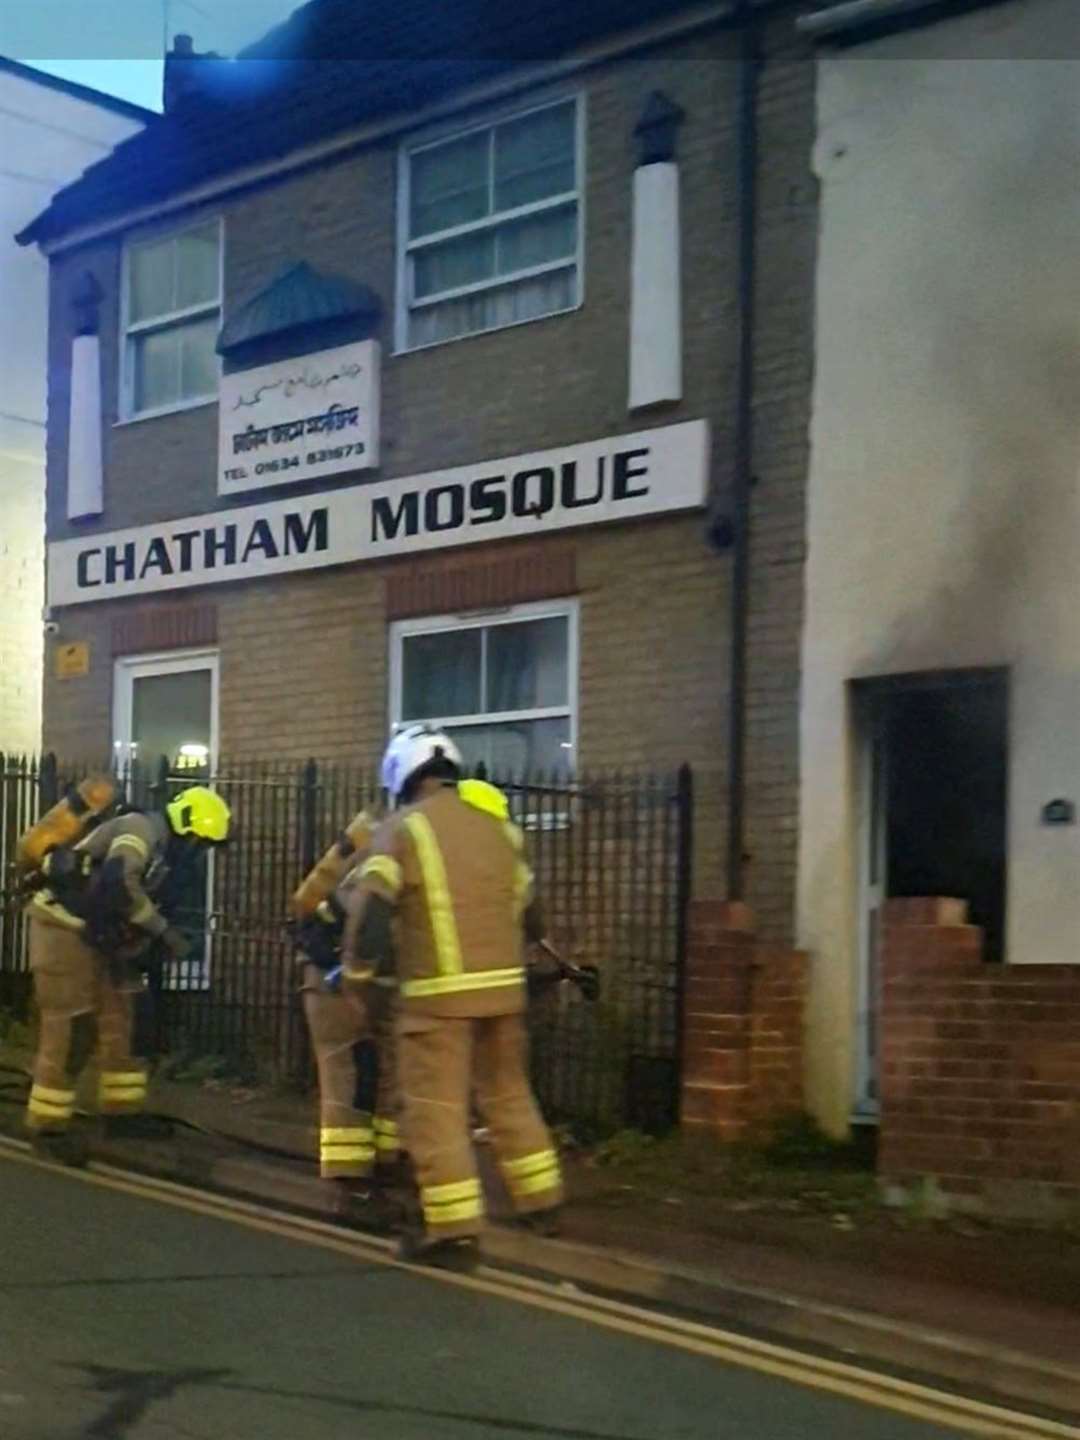 Two engines were sent to a property next to Chatham Mosque. Picture: Rachel Evans